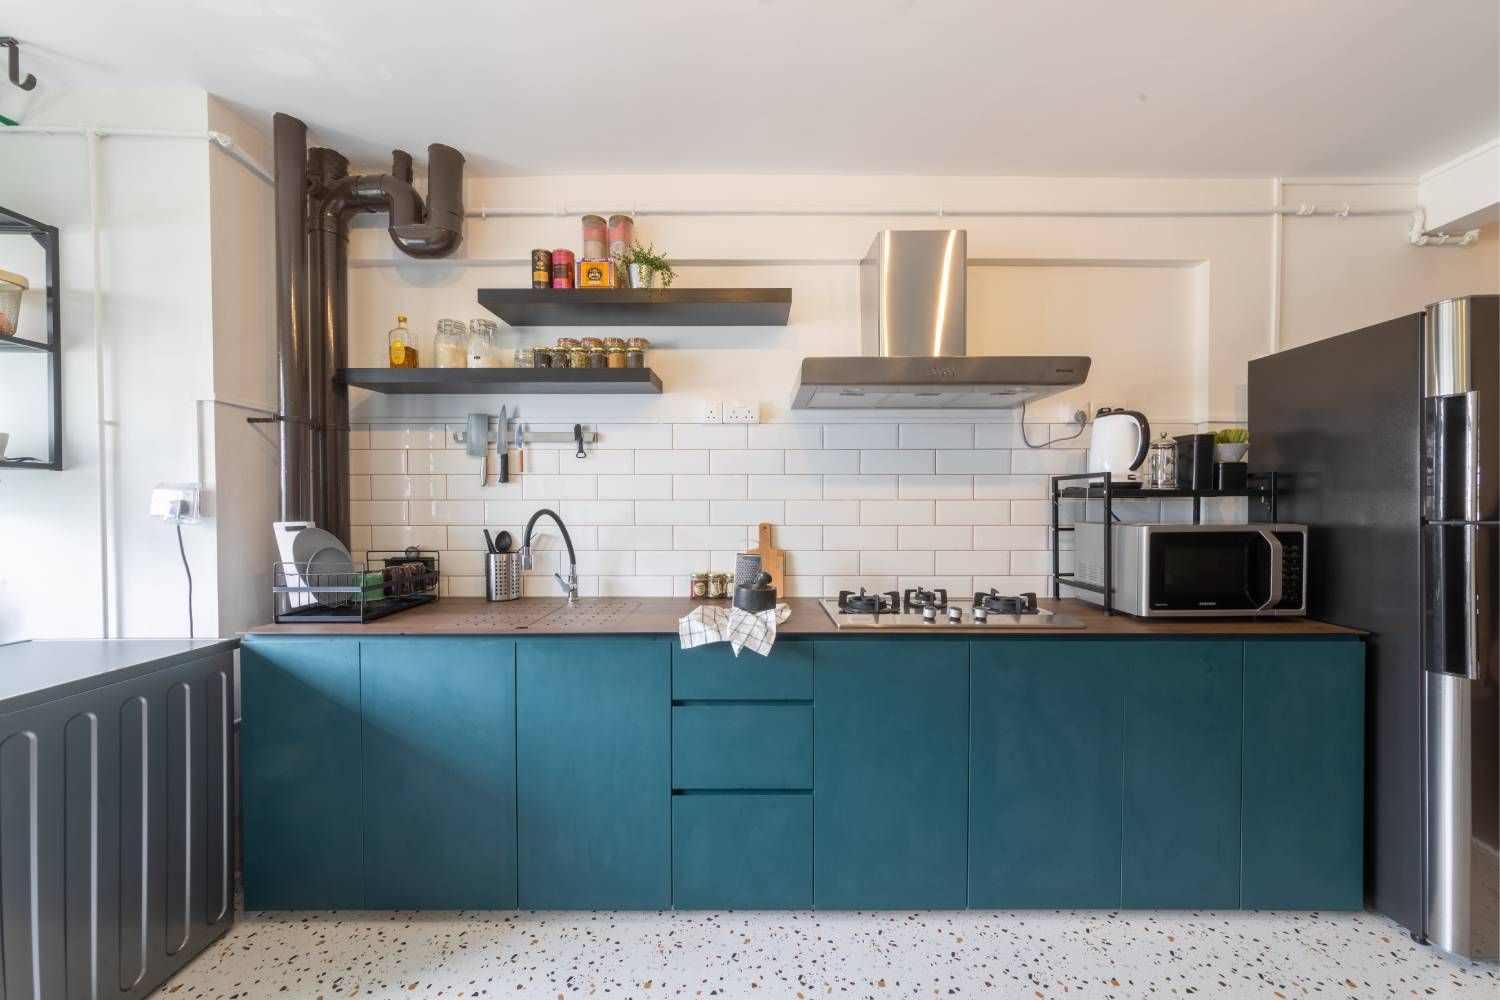 Contemporary Straight Kitchen with Teal Cabinets and White Subway Tiles